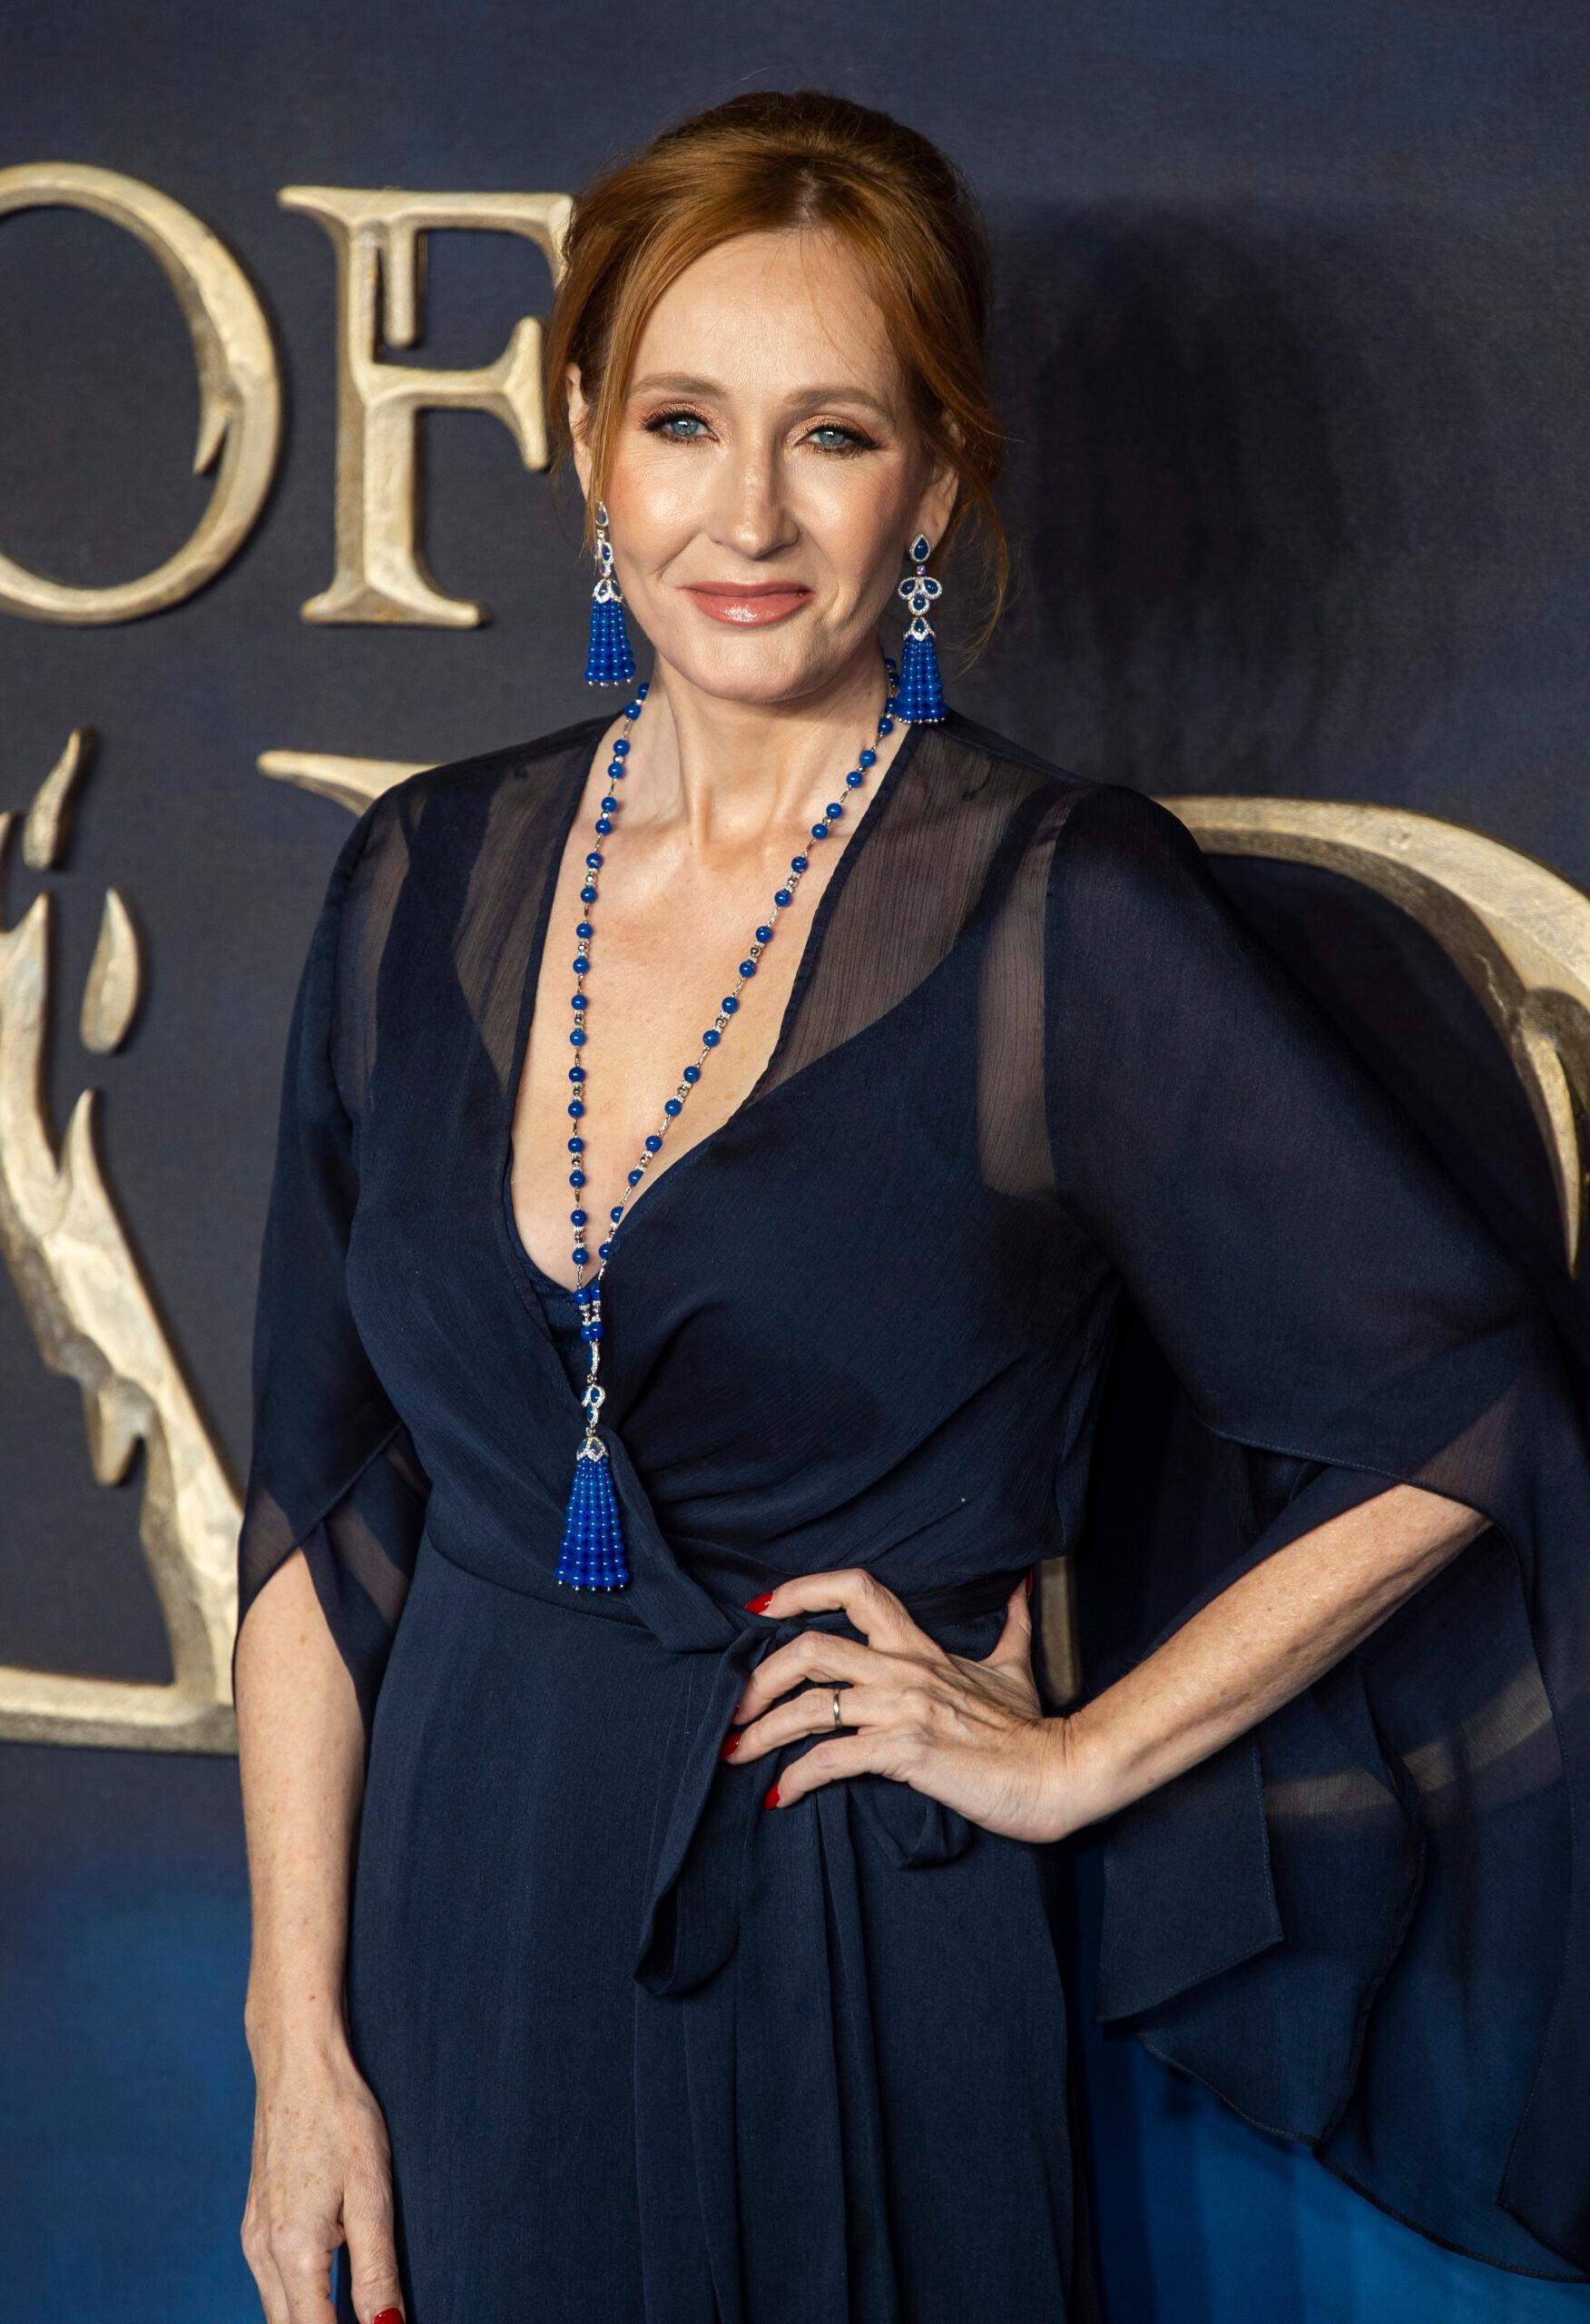 J.K. Rowling at The UK Premiere of Fantastic Beasts: The Crimes Of Grindelwald